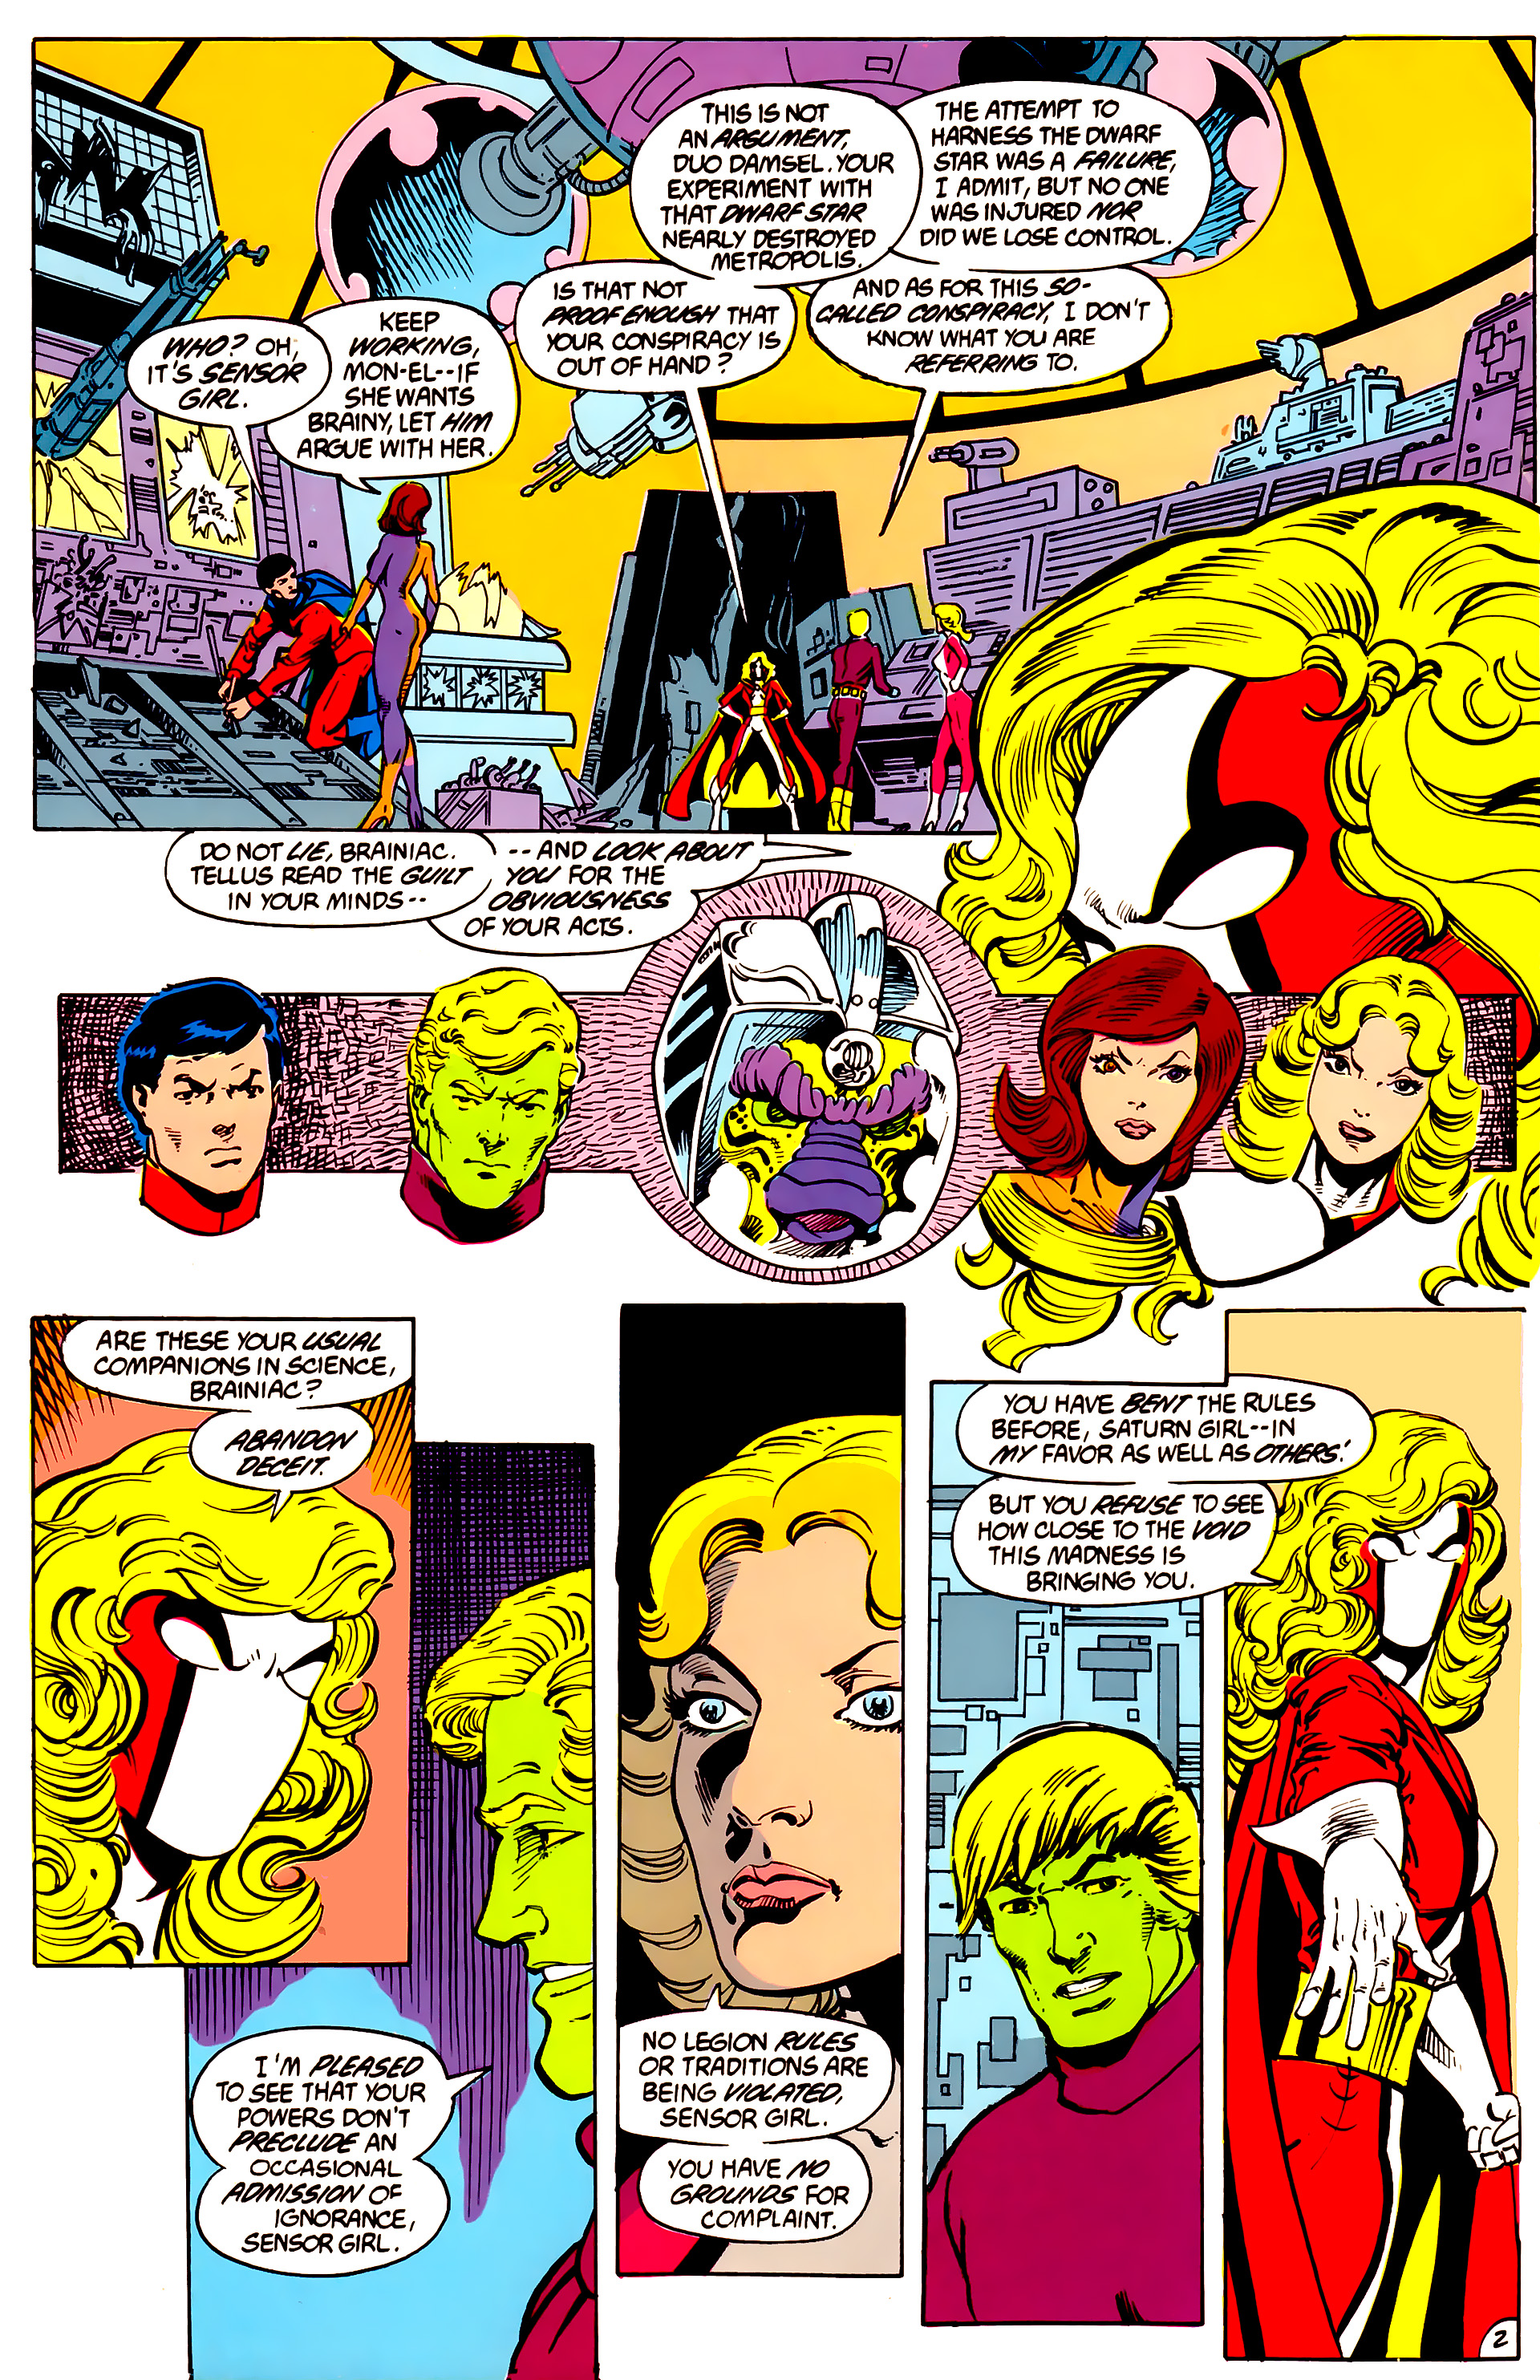 Legion of Super-Heroes (1984) 49 Page 2